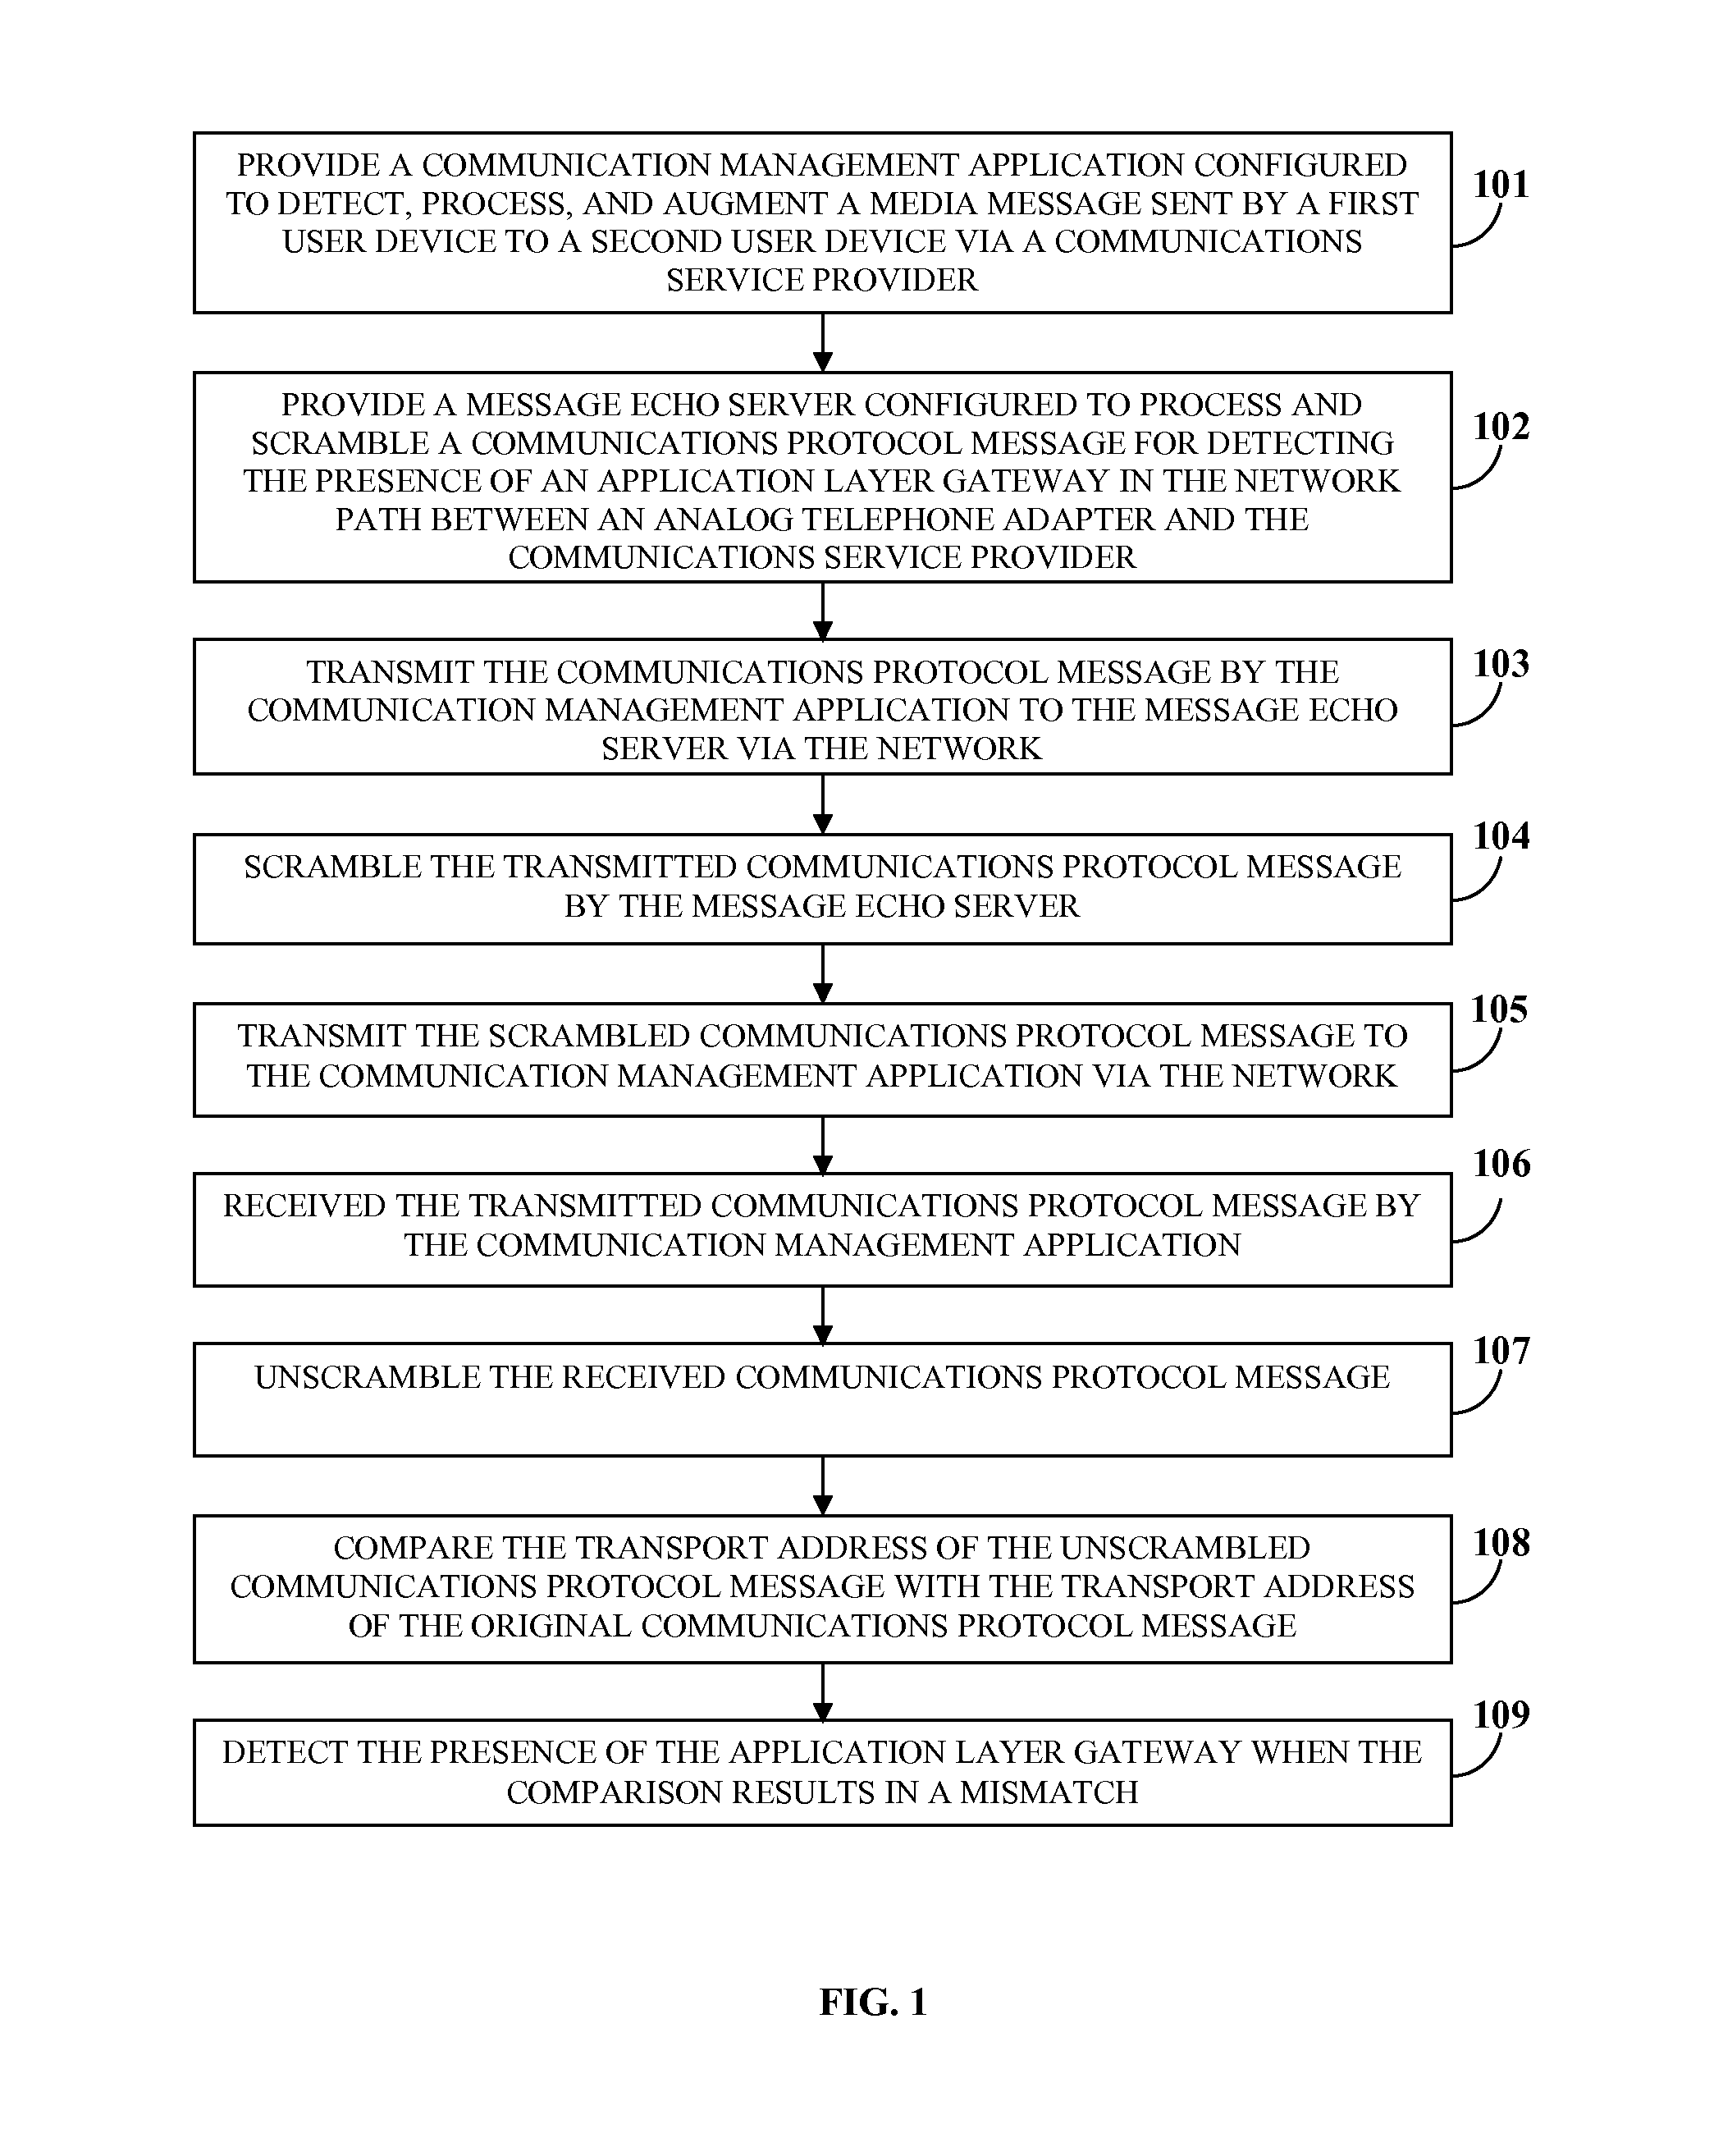 Communications management and gateway bypassing system